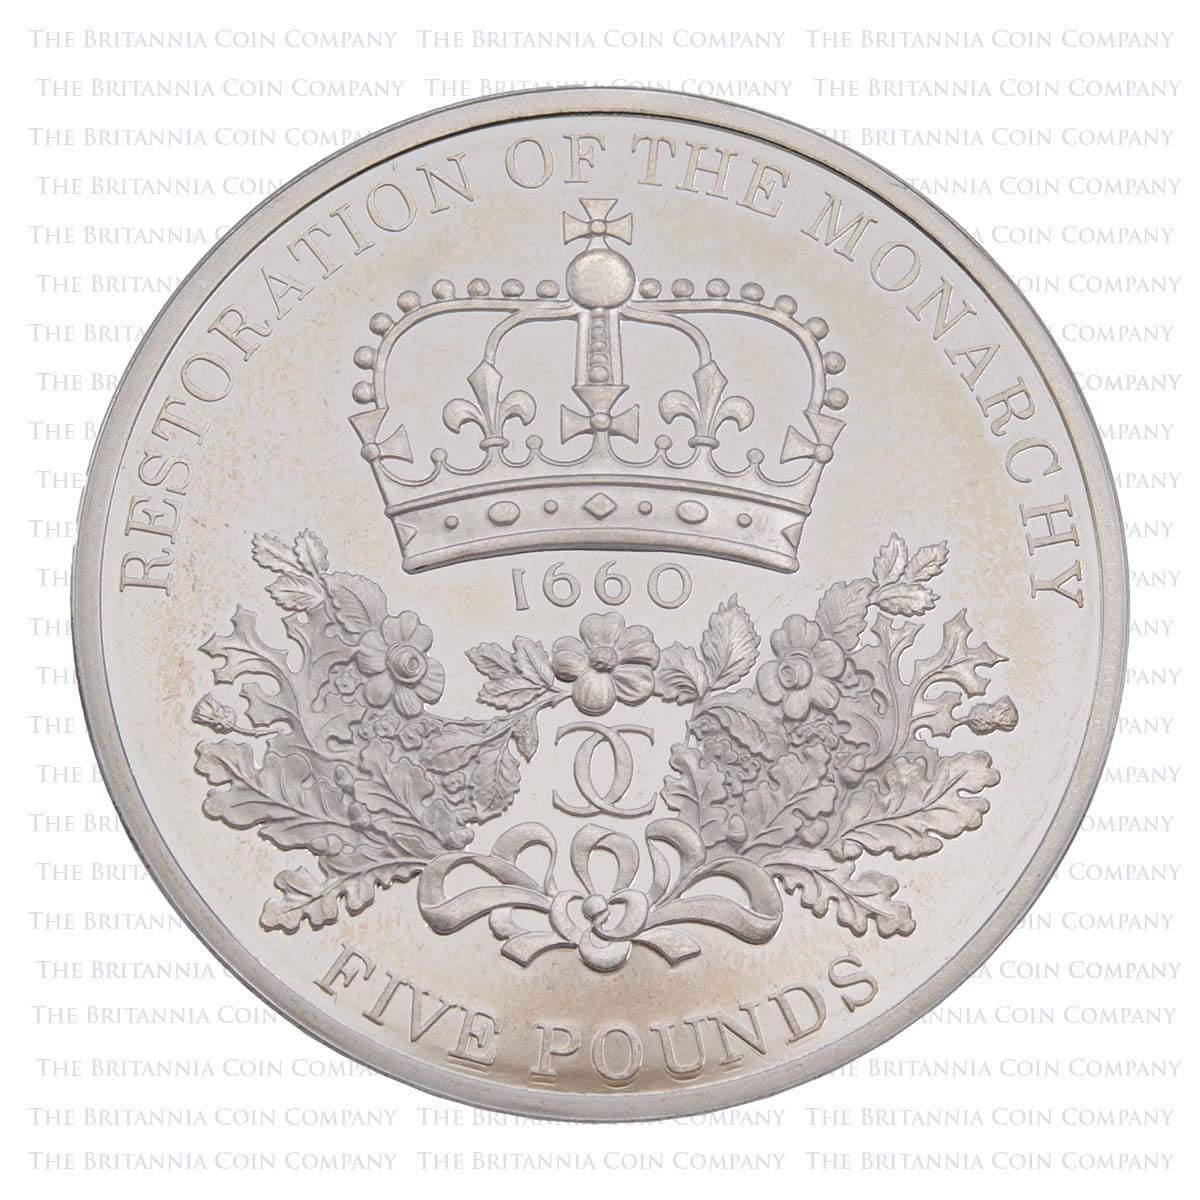 2010 Restoration of the Monarchy 350th Anniversary £5 Crown Piedfort Silver Proof Reverse